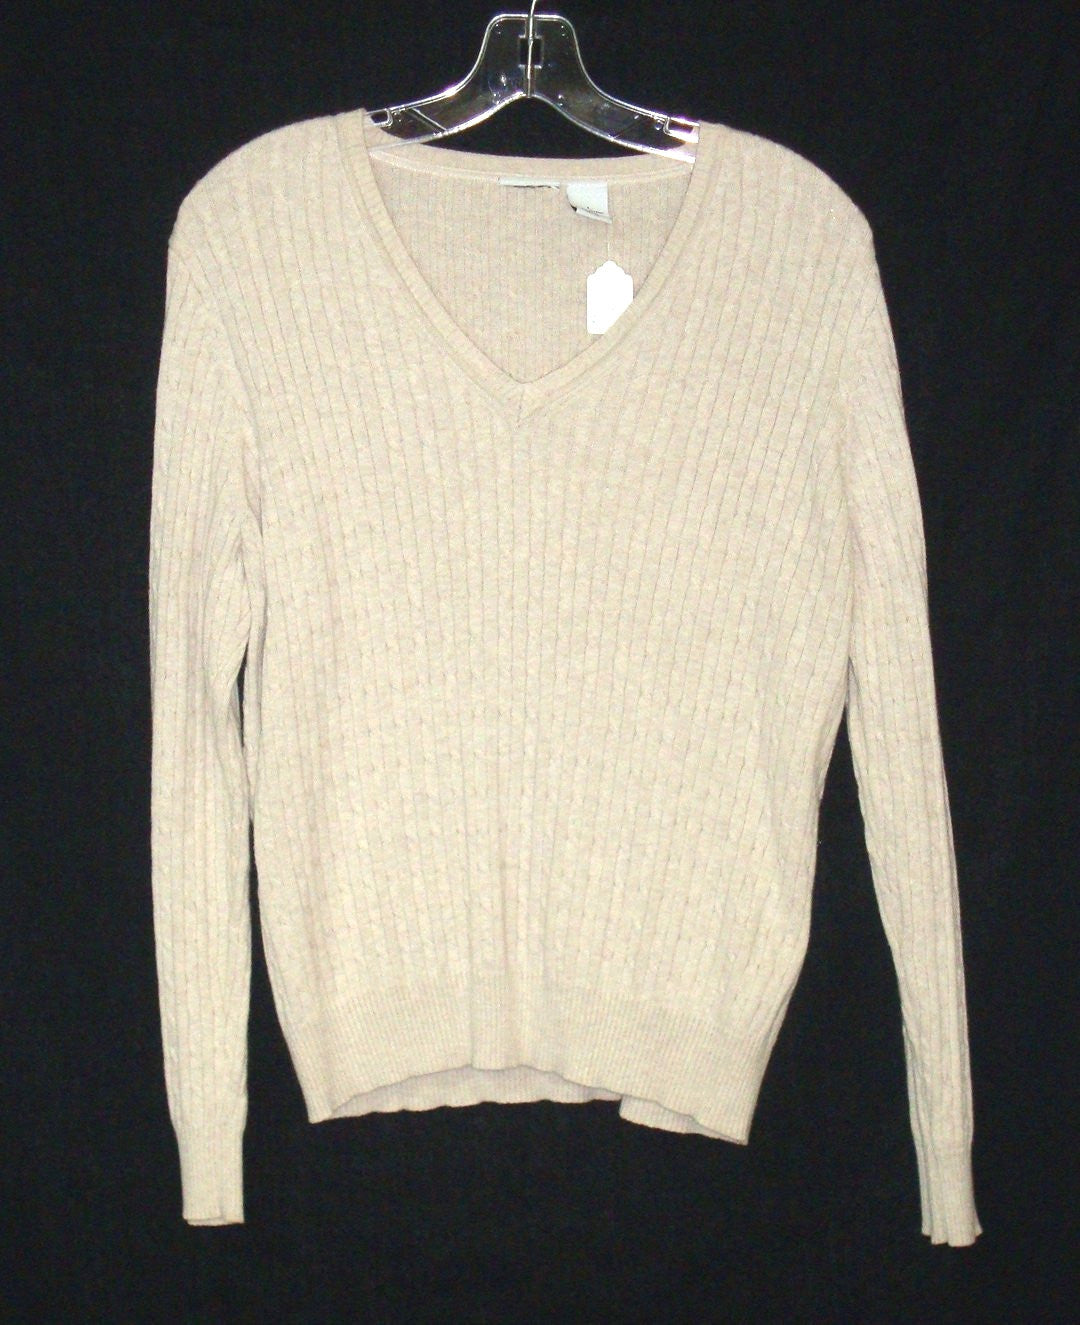 BEIGE CABLE KNIT V-NECK PULL-OVER SWEATER, LONG SLEEVE SZ LARGE